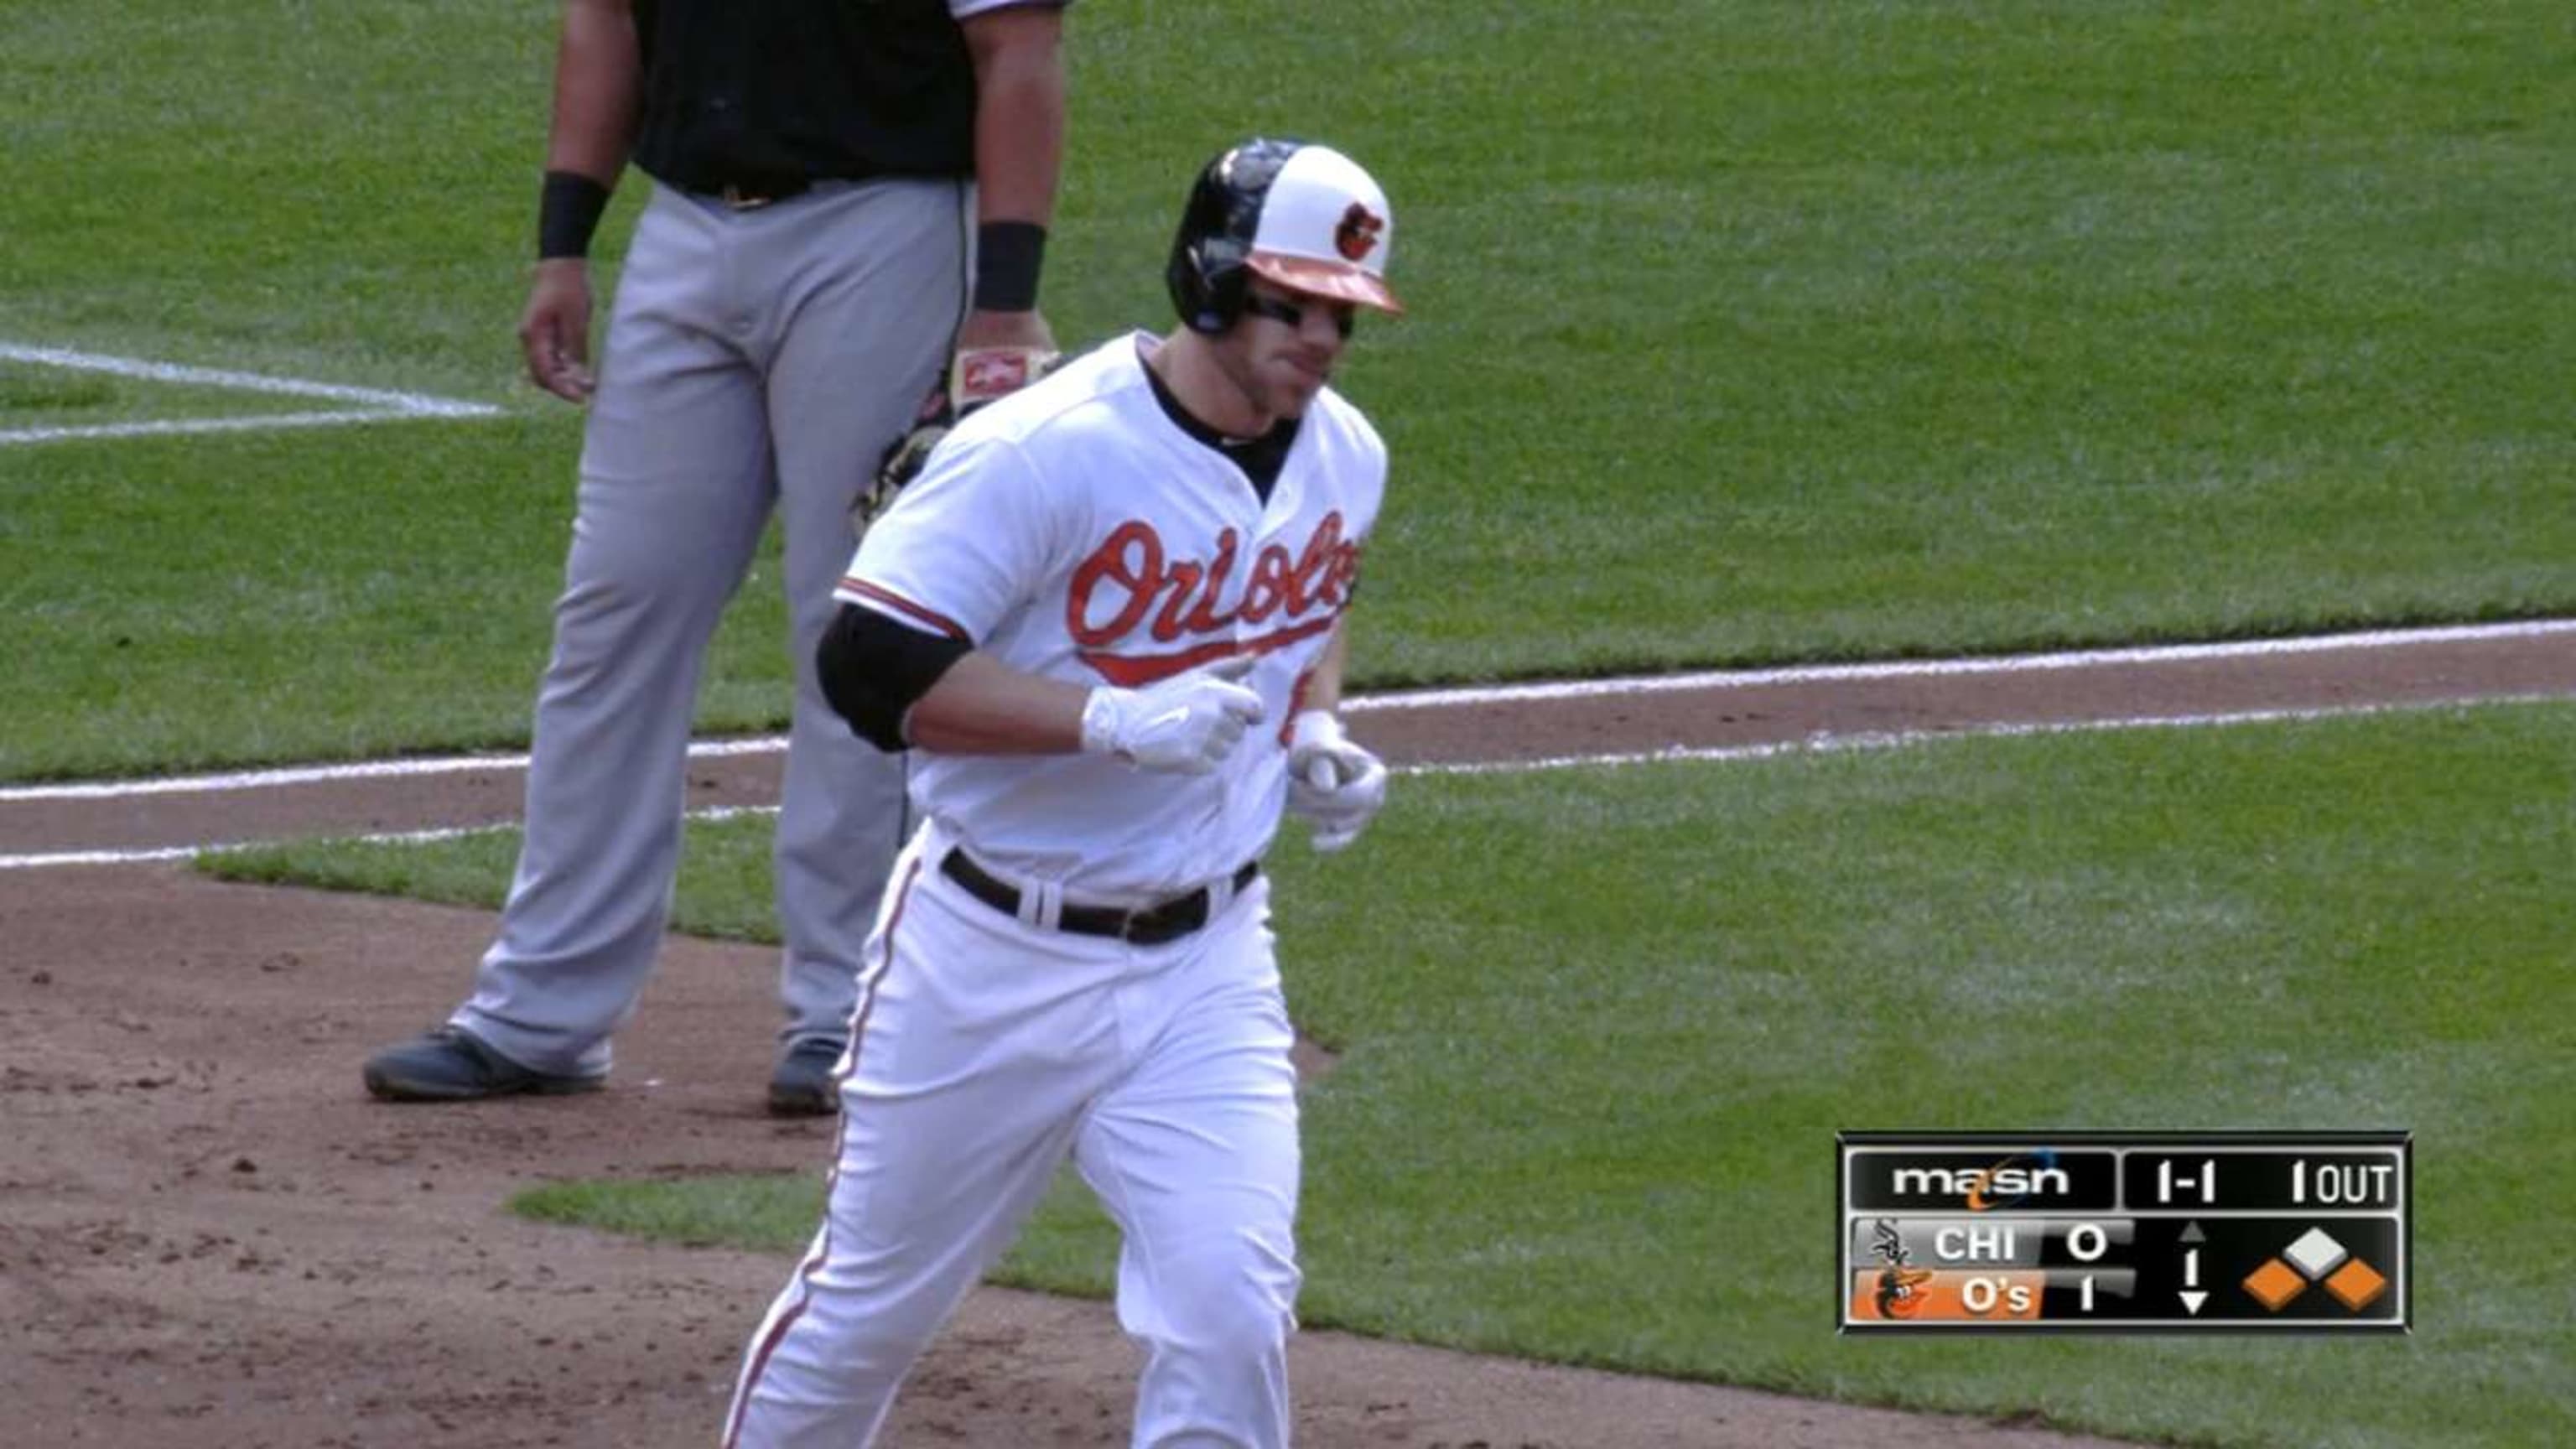 Orioles blank Brewers 2-0 in home opener at Camden Yards - Seattle Sports